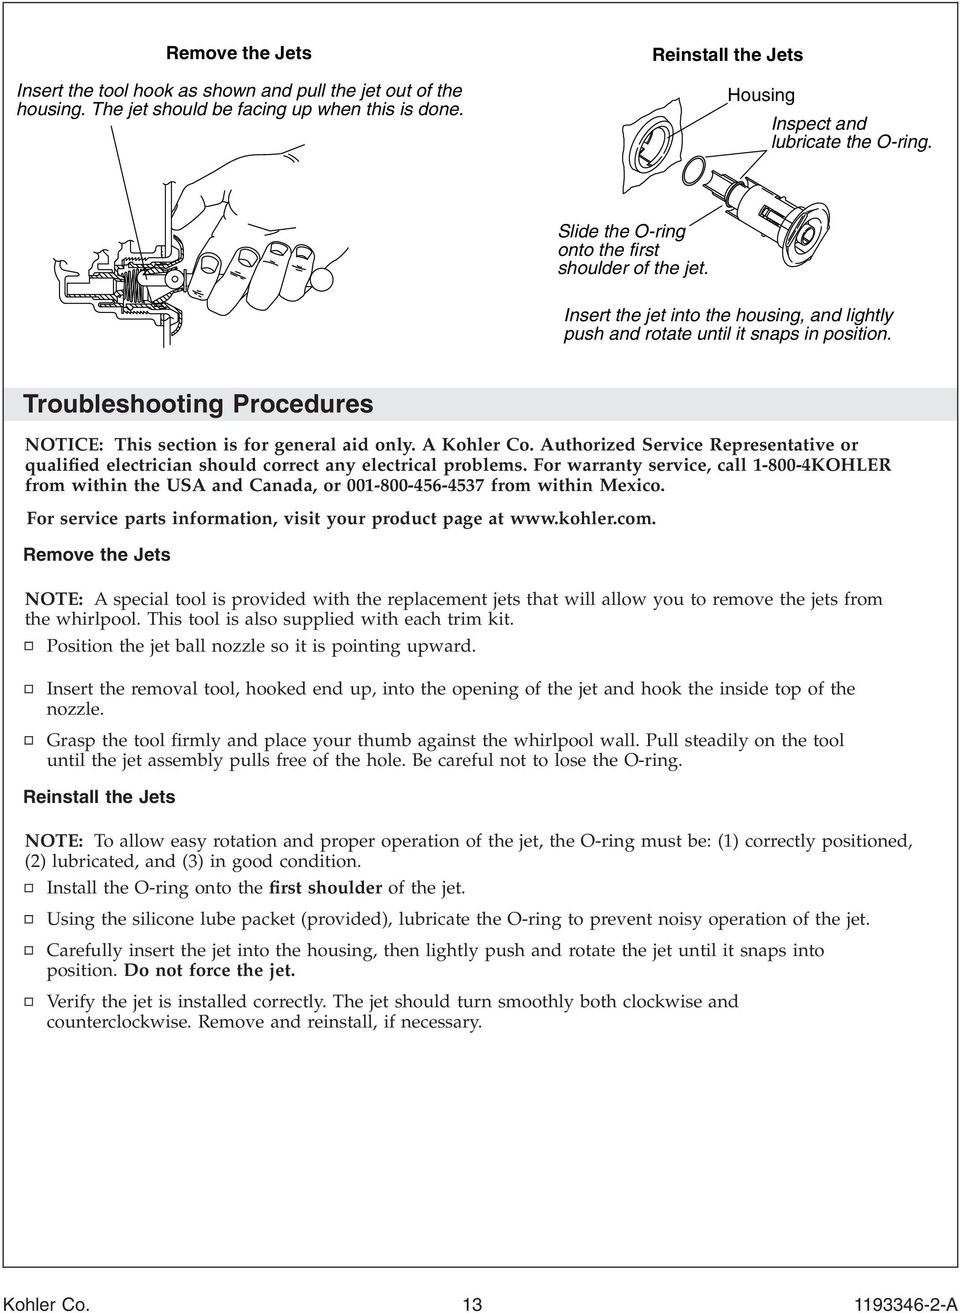 Troubleshooting Procedures NOTICE: This section is for general aid only. A Kohler Co. Authorized Service Representative or qualified electrician should correct any electrical problems.